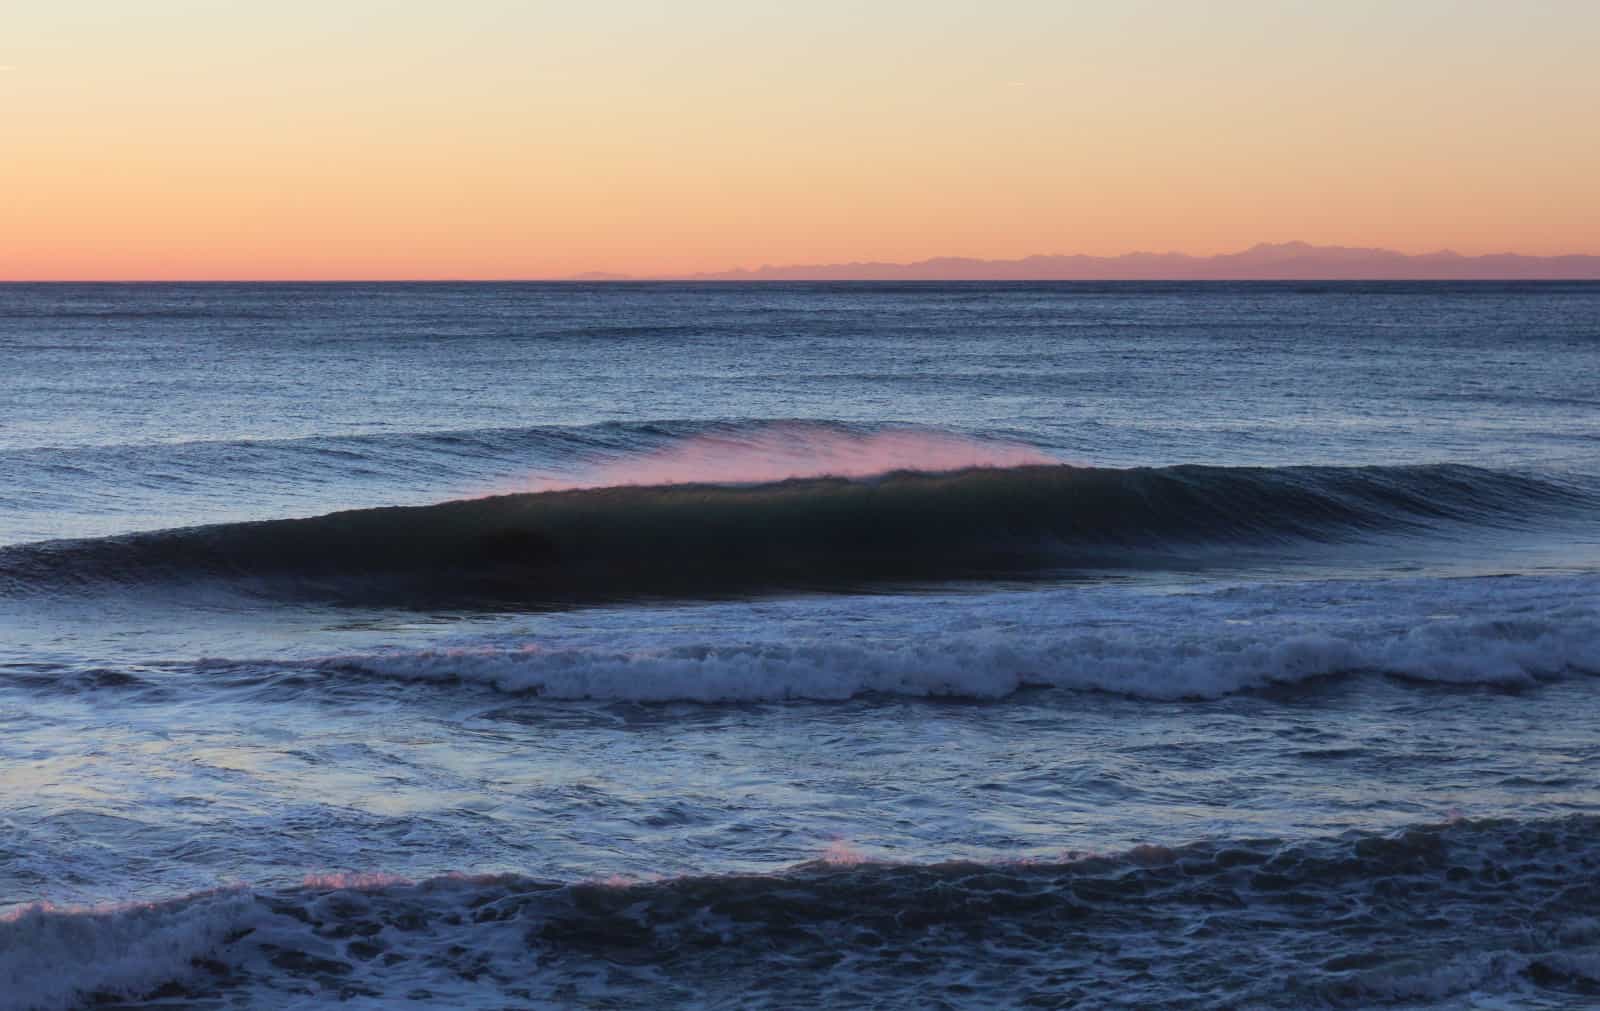 After sunset offshore wave